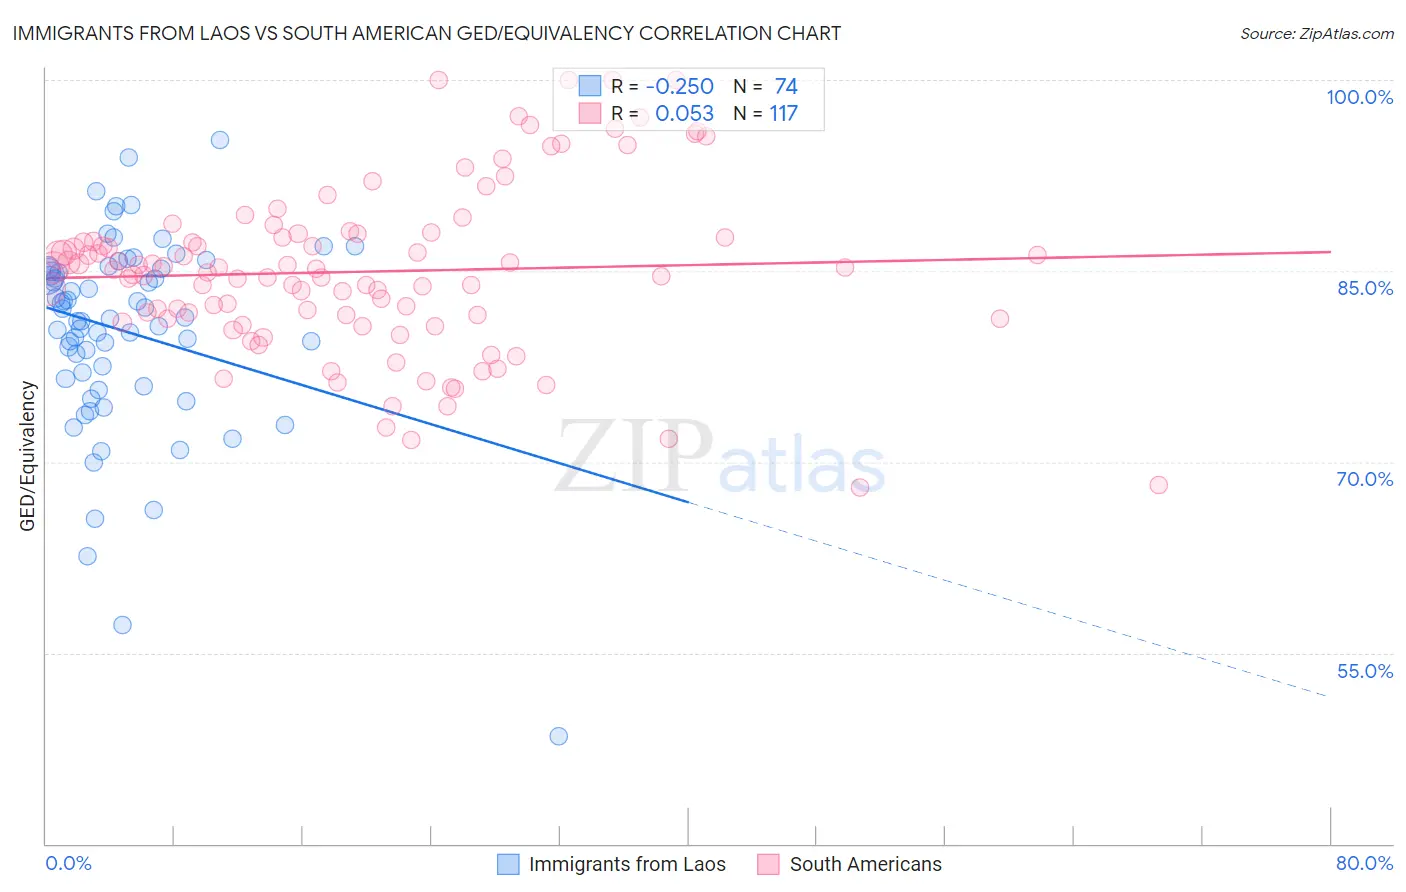 Immigrants from Laos vs South American GED/Equivalency